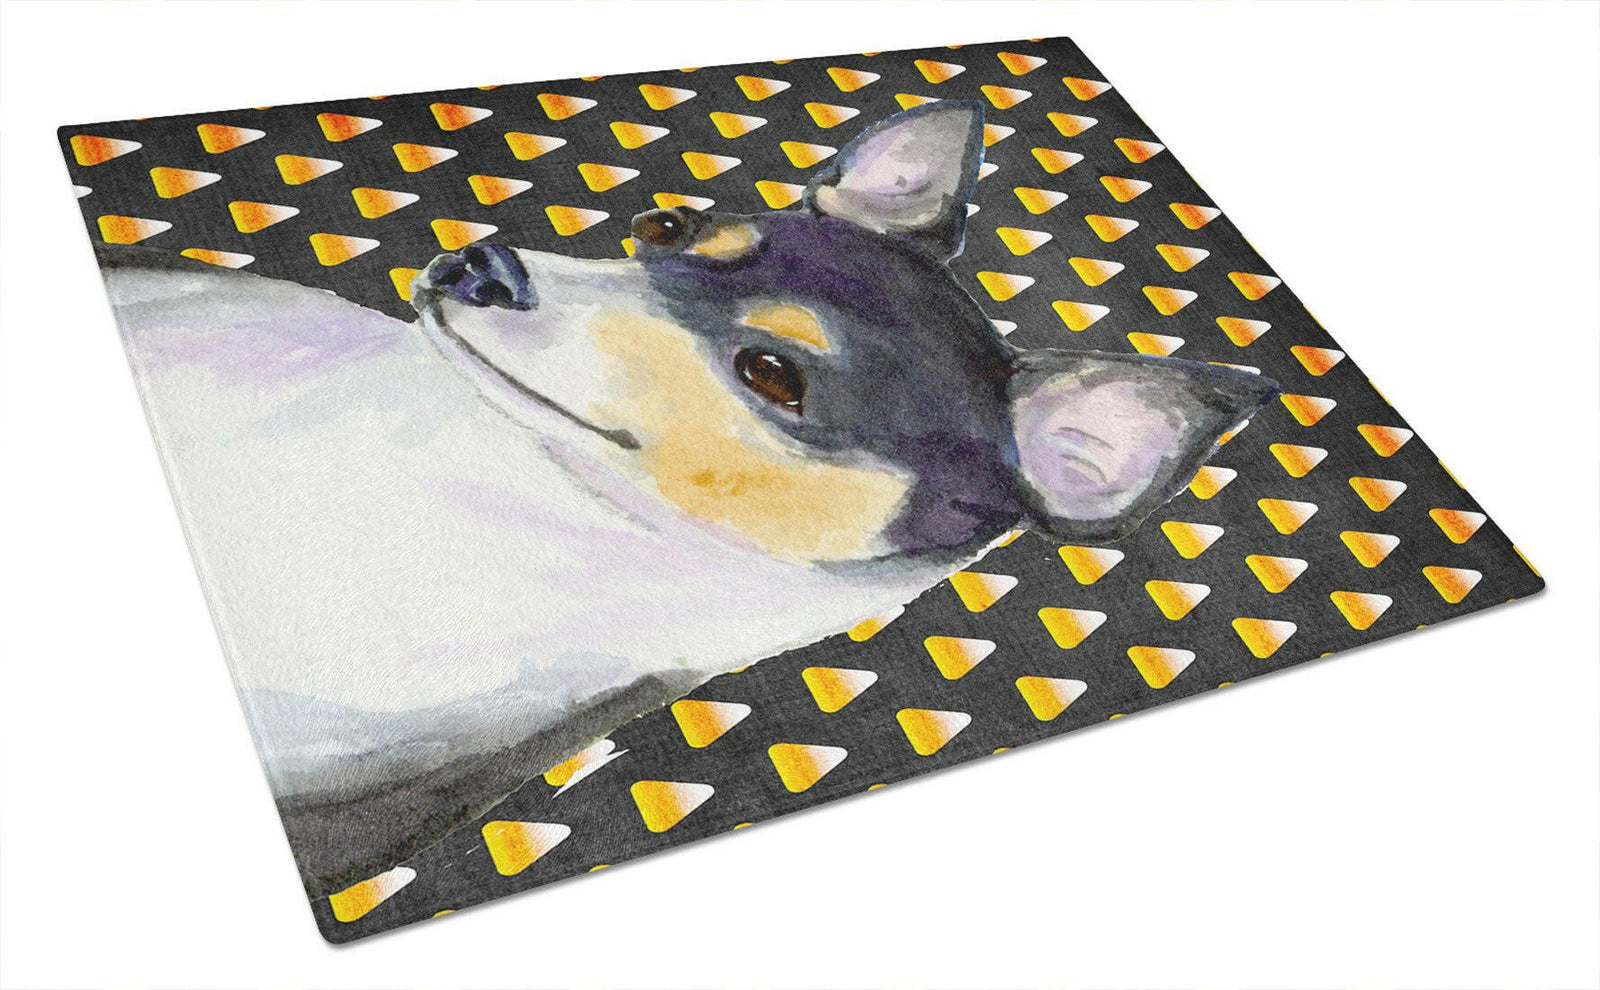 Chihuahua Candy Corn Halloween Portrait Glass Cutting Board Large by Caroline's Treasures